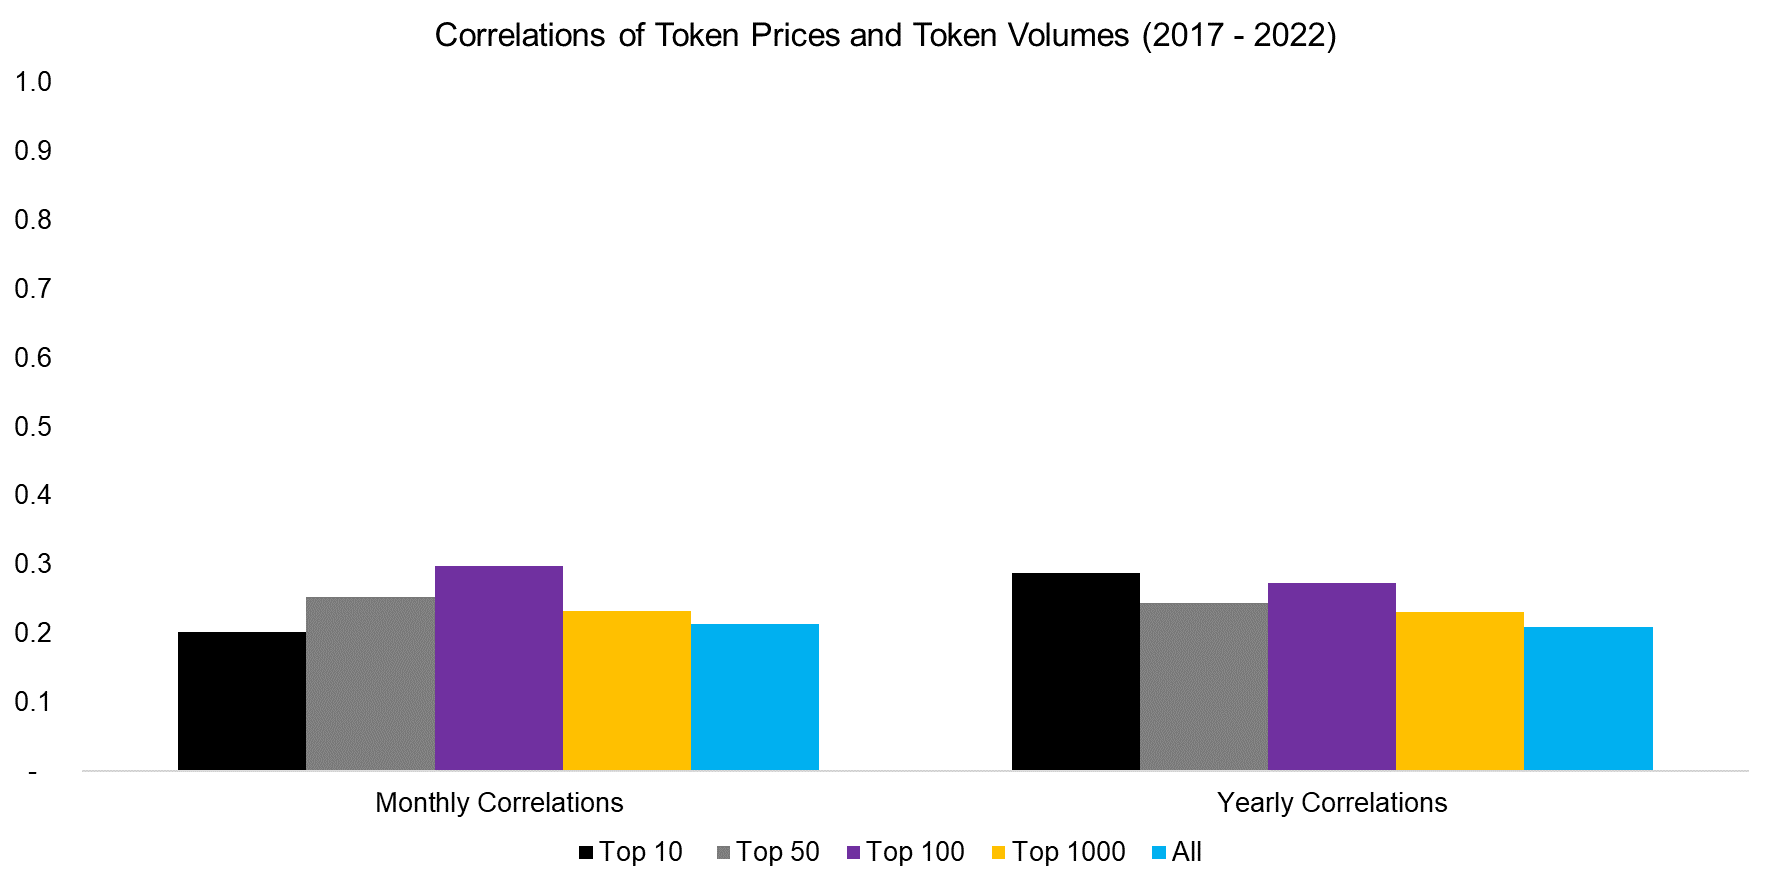 Correlations of Token Prices and Token Volumes (2017 - 2022)